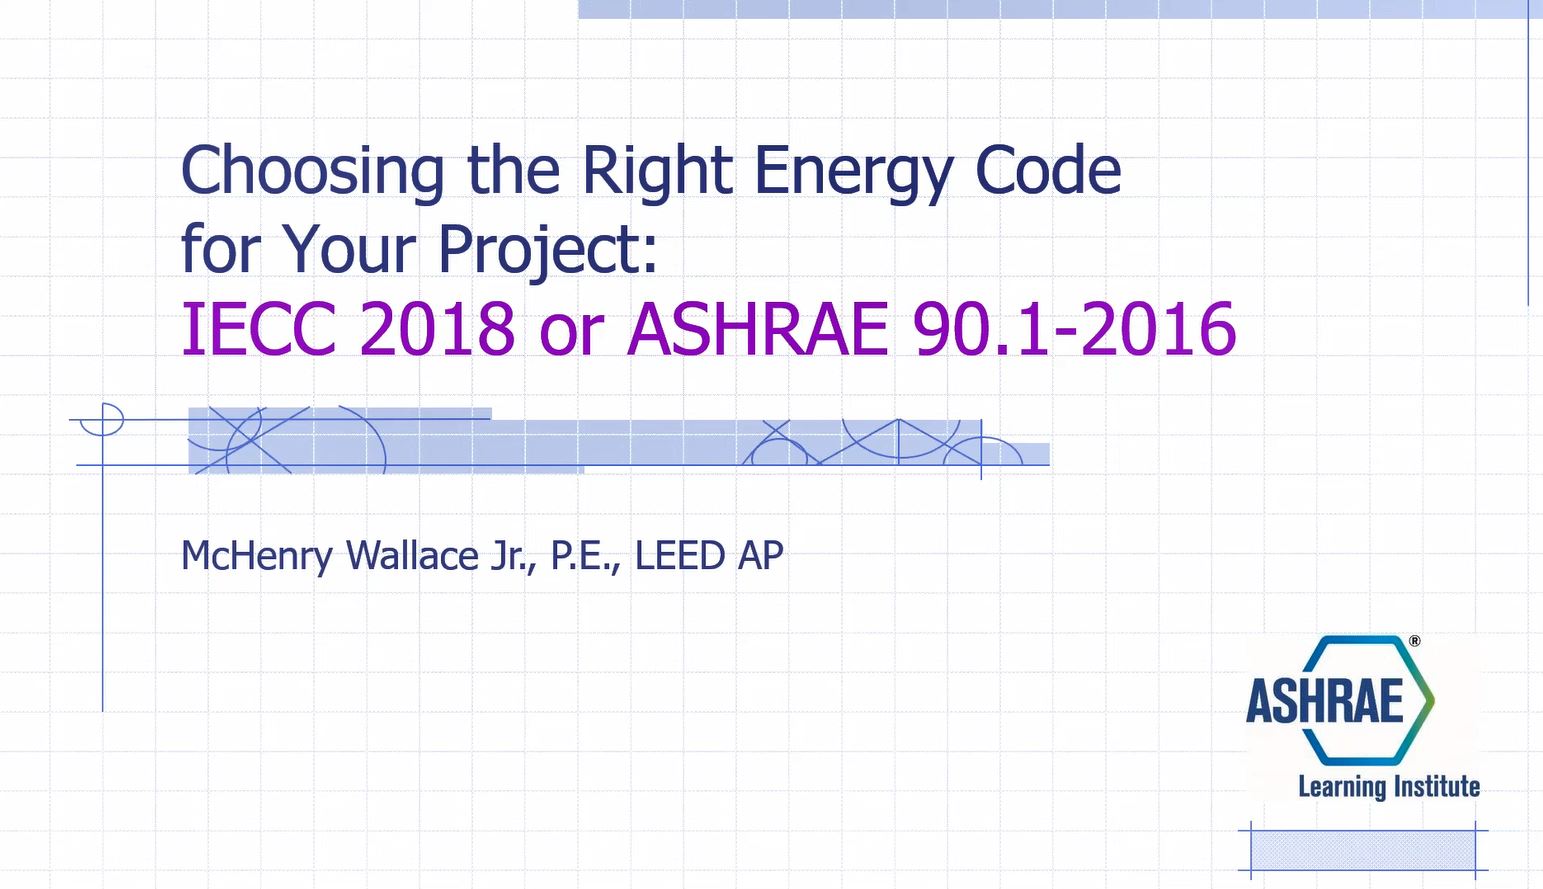 Choosing the Right Energy Code for Your Project: IECC 2018 or ASHRAE Standard 90.1-2016